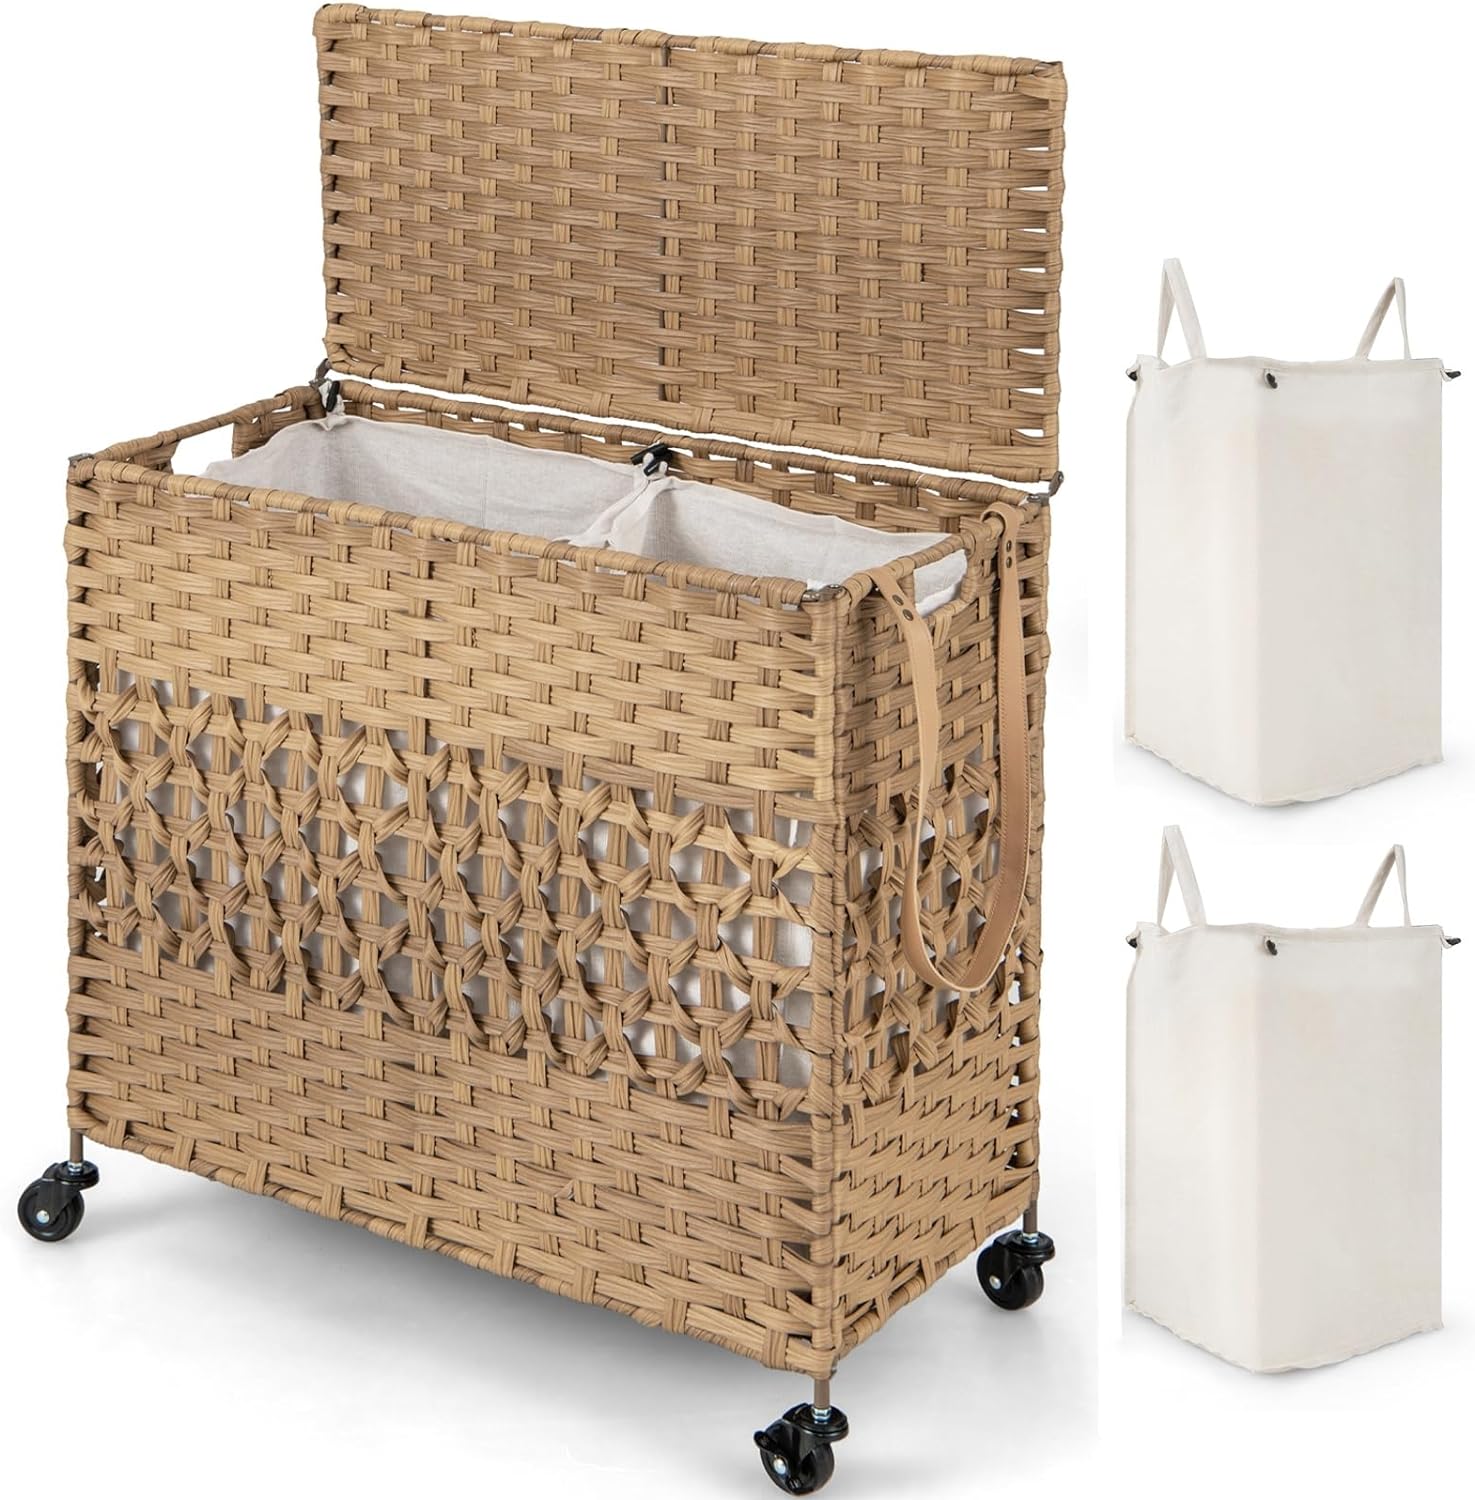 Giantex Laundry Hamper with Wheels and Lid, 33 Gal (125L) Wicker Laundry Basket, 2 Removable Liner Bags